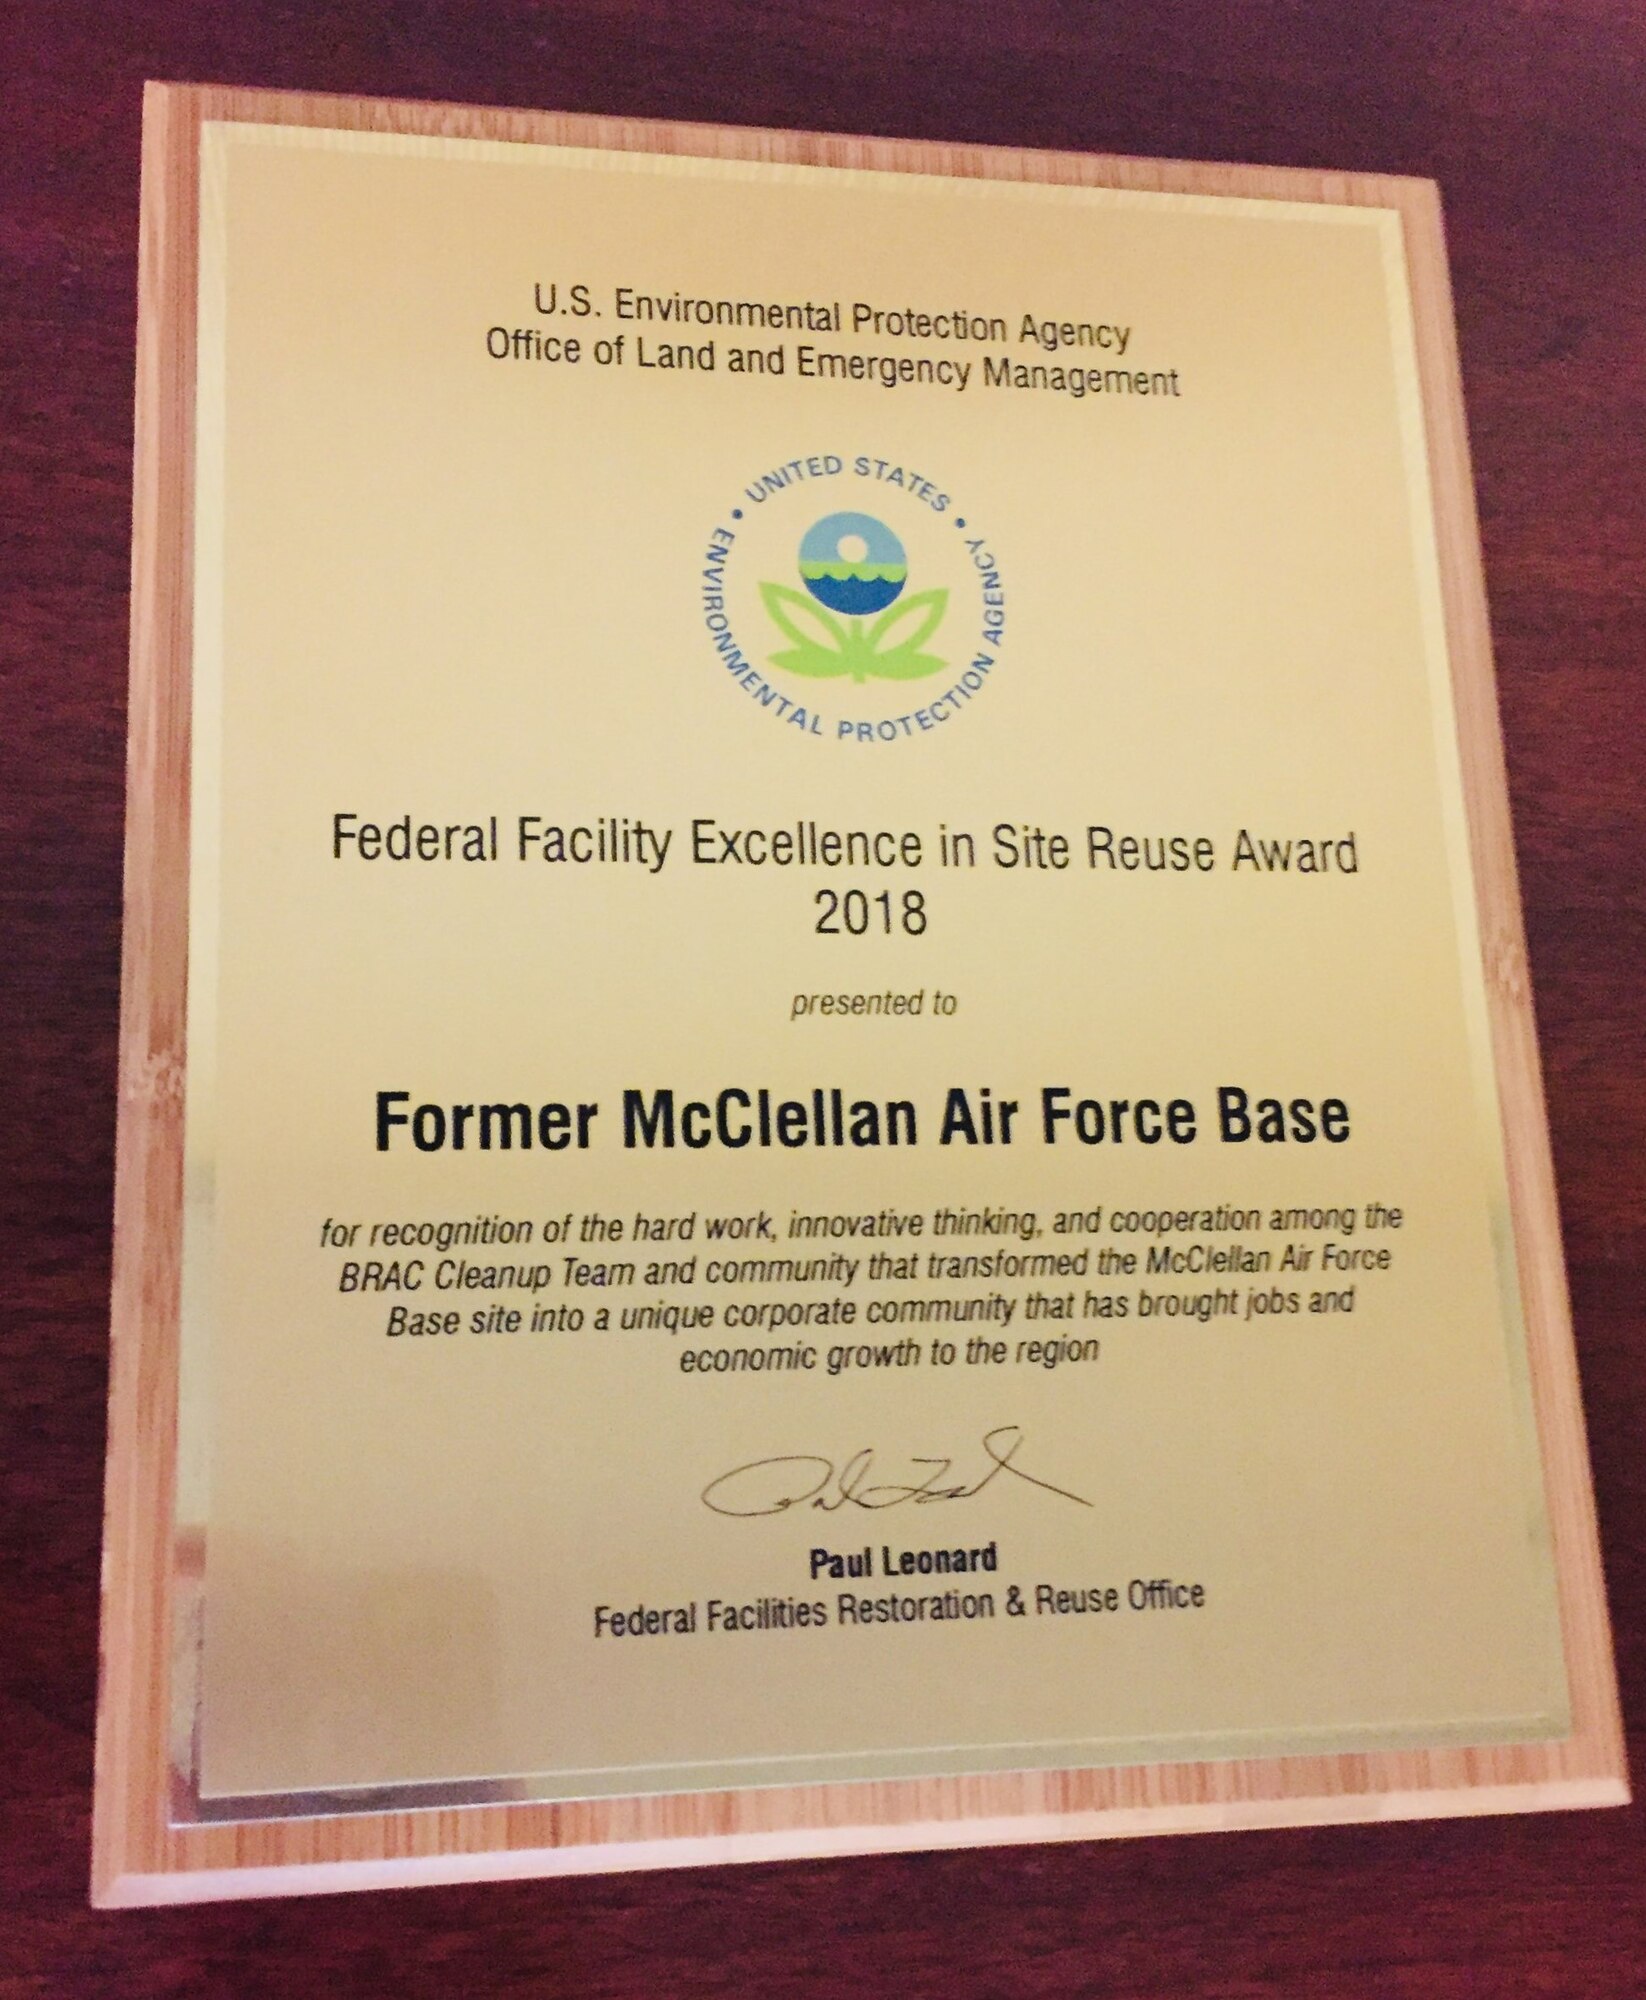 Award accepted by AFCEC from EPA for their efforts at the former McClellan Air Force Base, in Sacramento County, California.